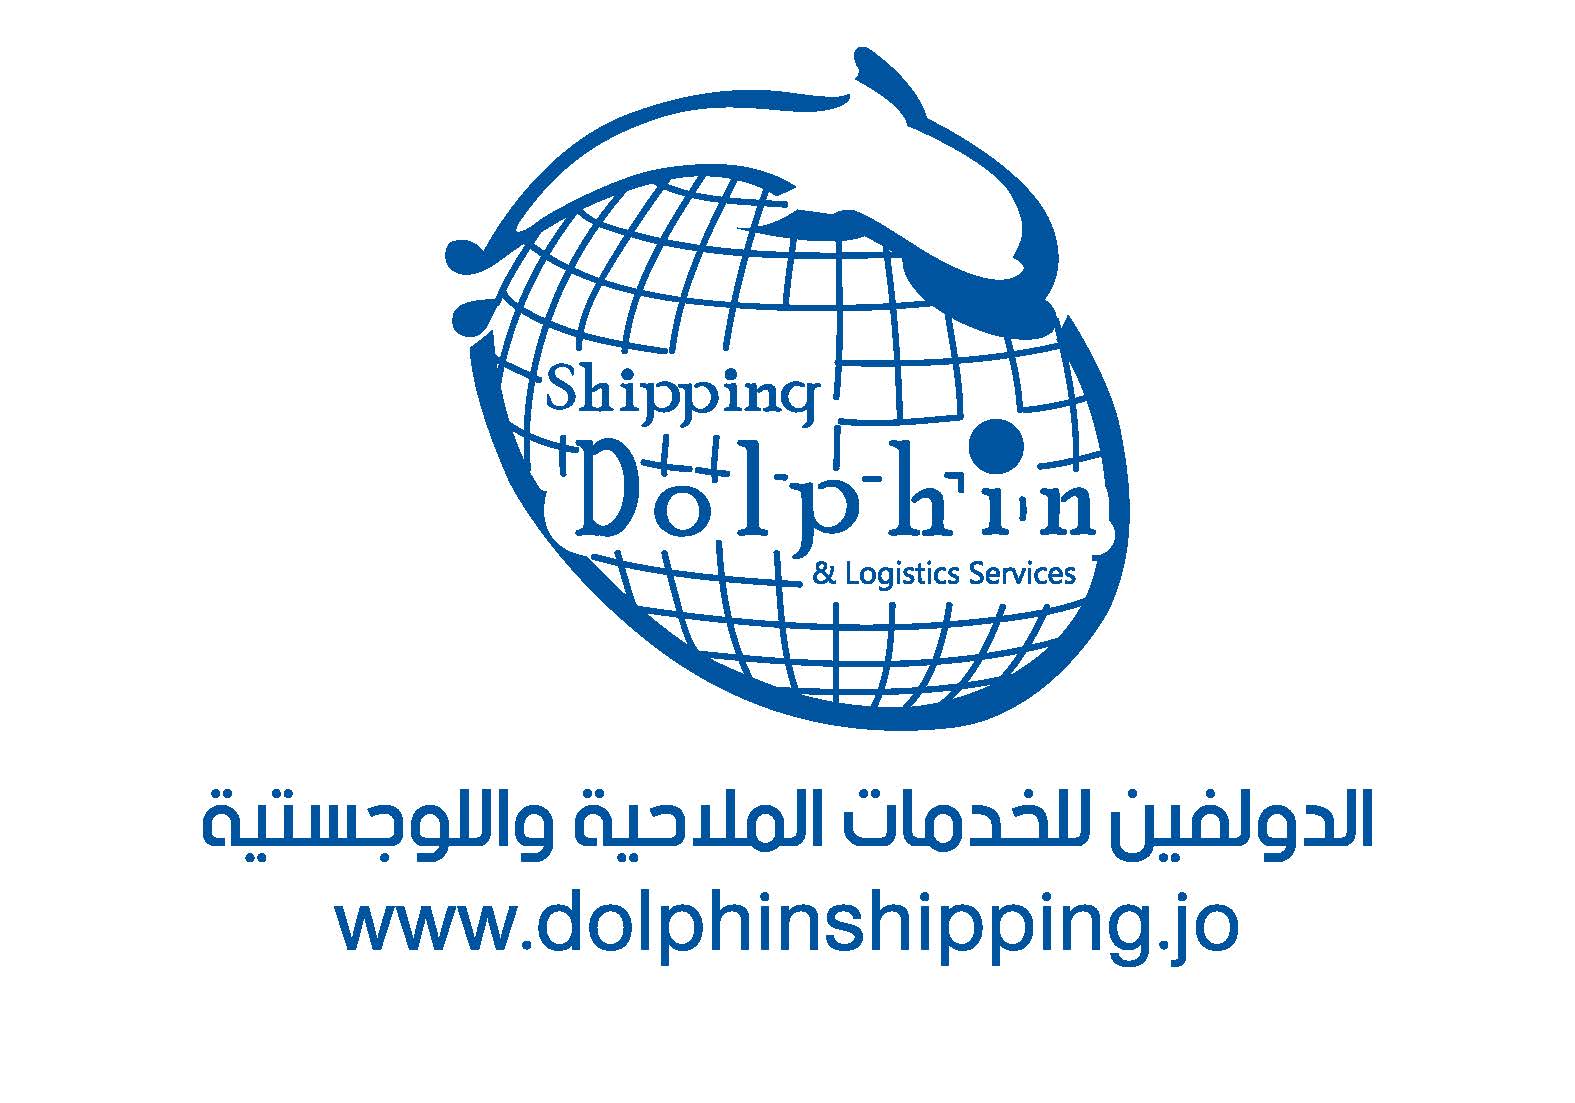 Dolphin Shipping & Logistics Services